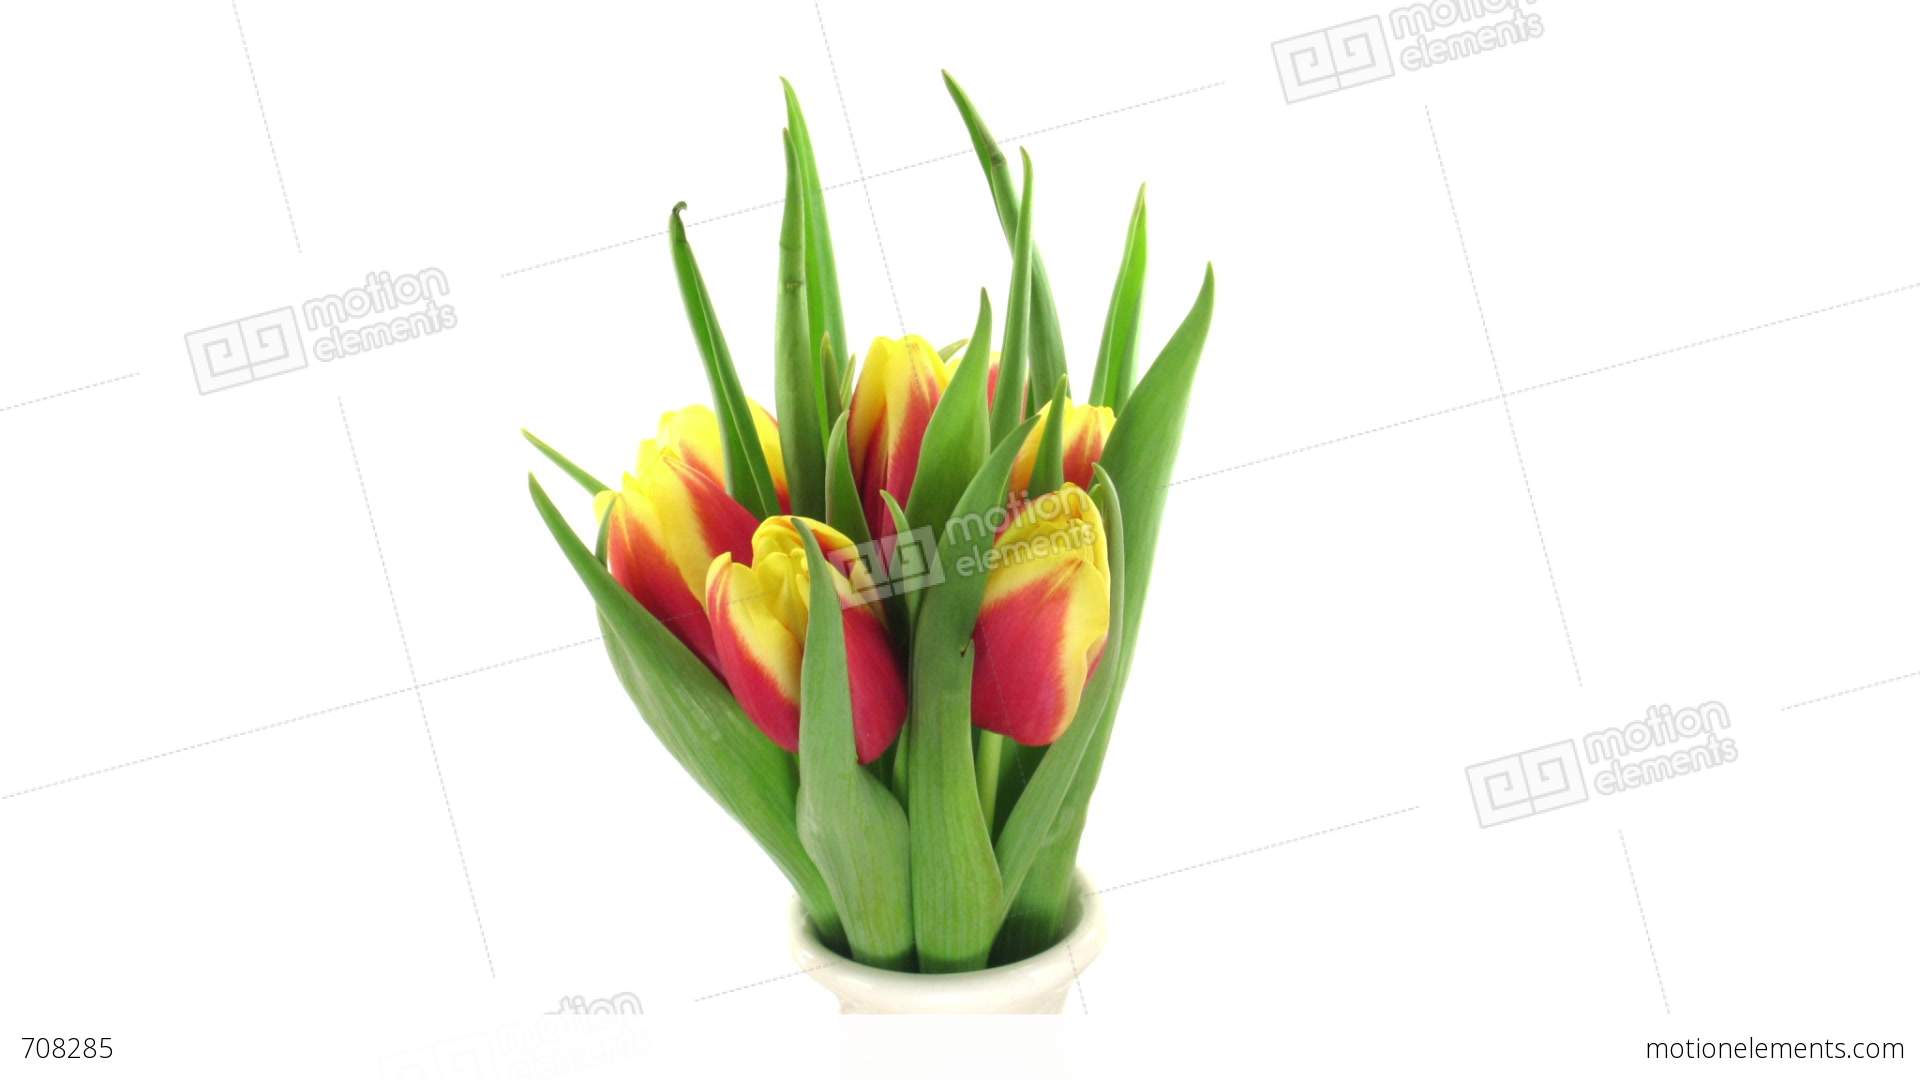 Stereoscopic 3D Time-lapse Of Opening Yellow-red Tulip 1 (combo RGB ...